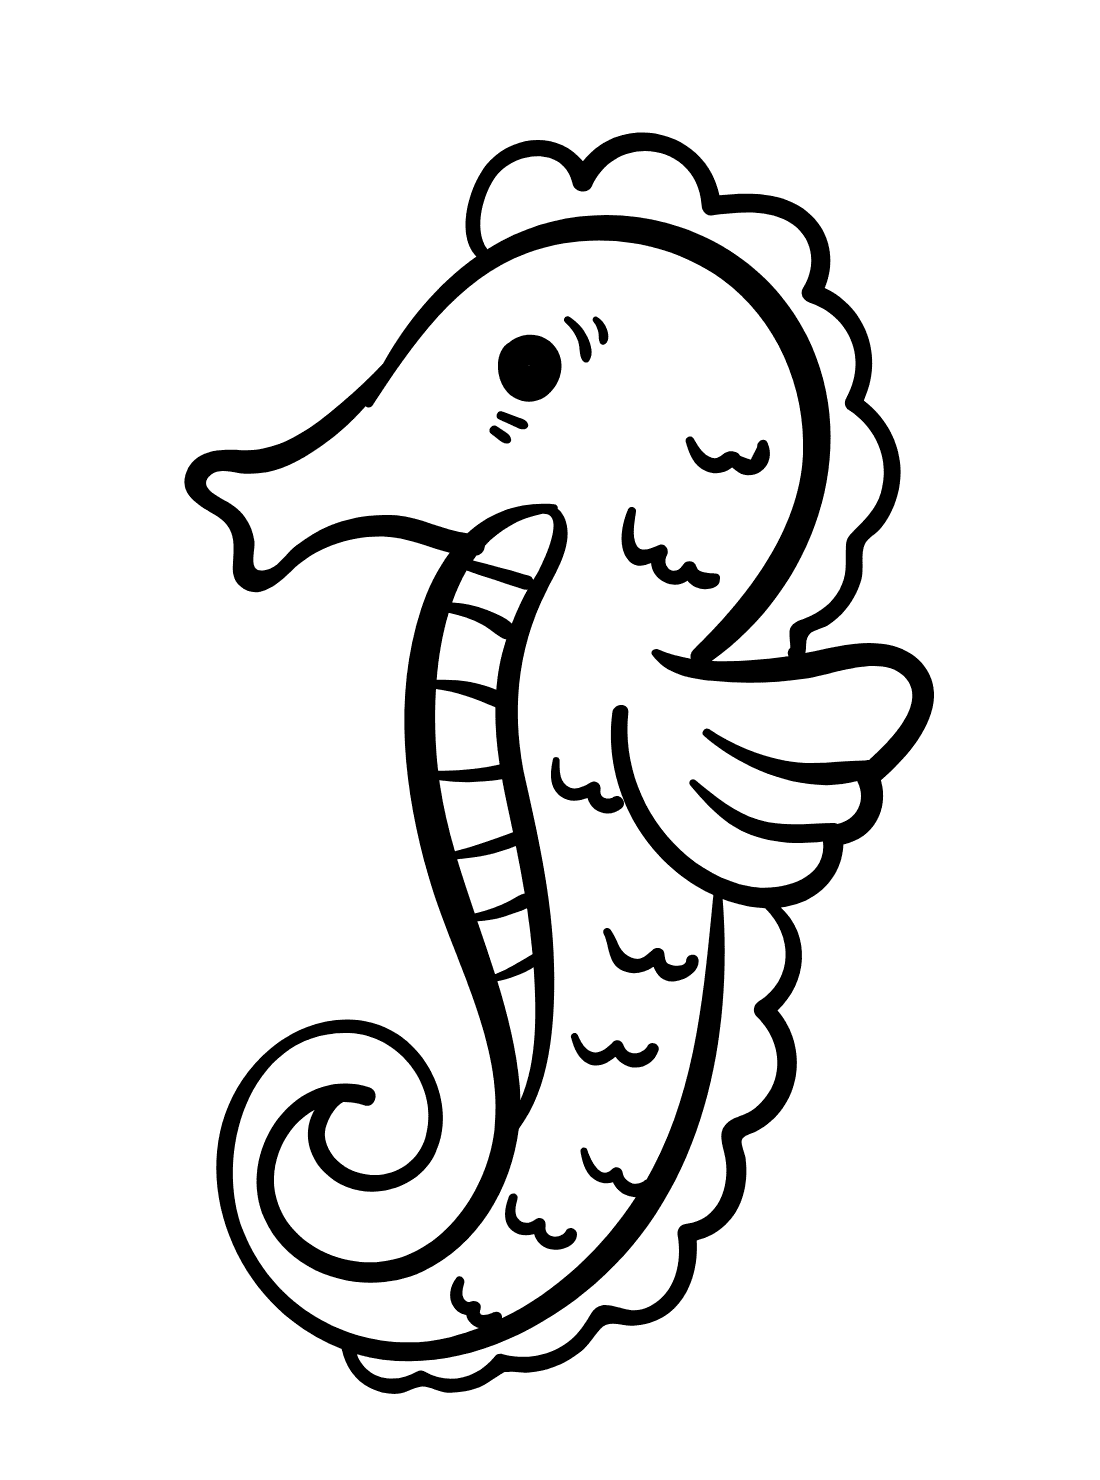 Seahorse Coloring Pages Free Online For Kids